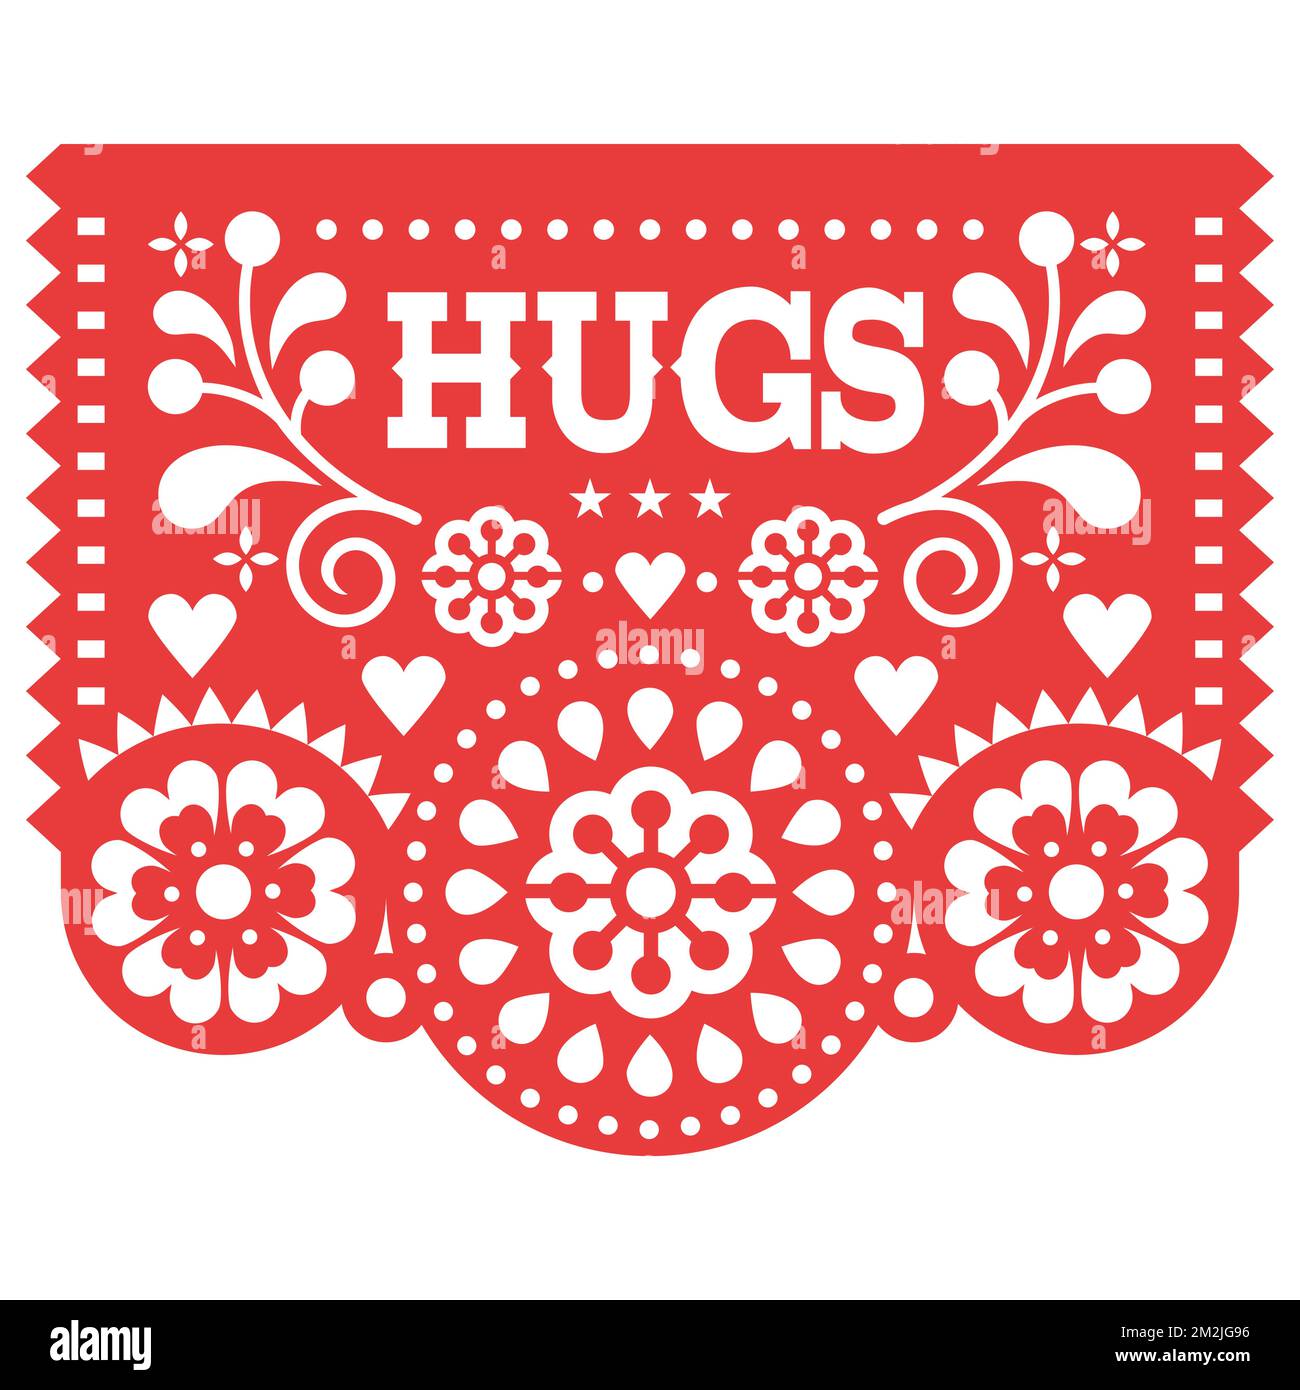 Hugs Papel Picado vector greeting card design, Valentine's Day paper cutout decoration Mexican, love and support concept Stock Vector